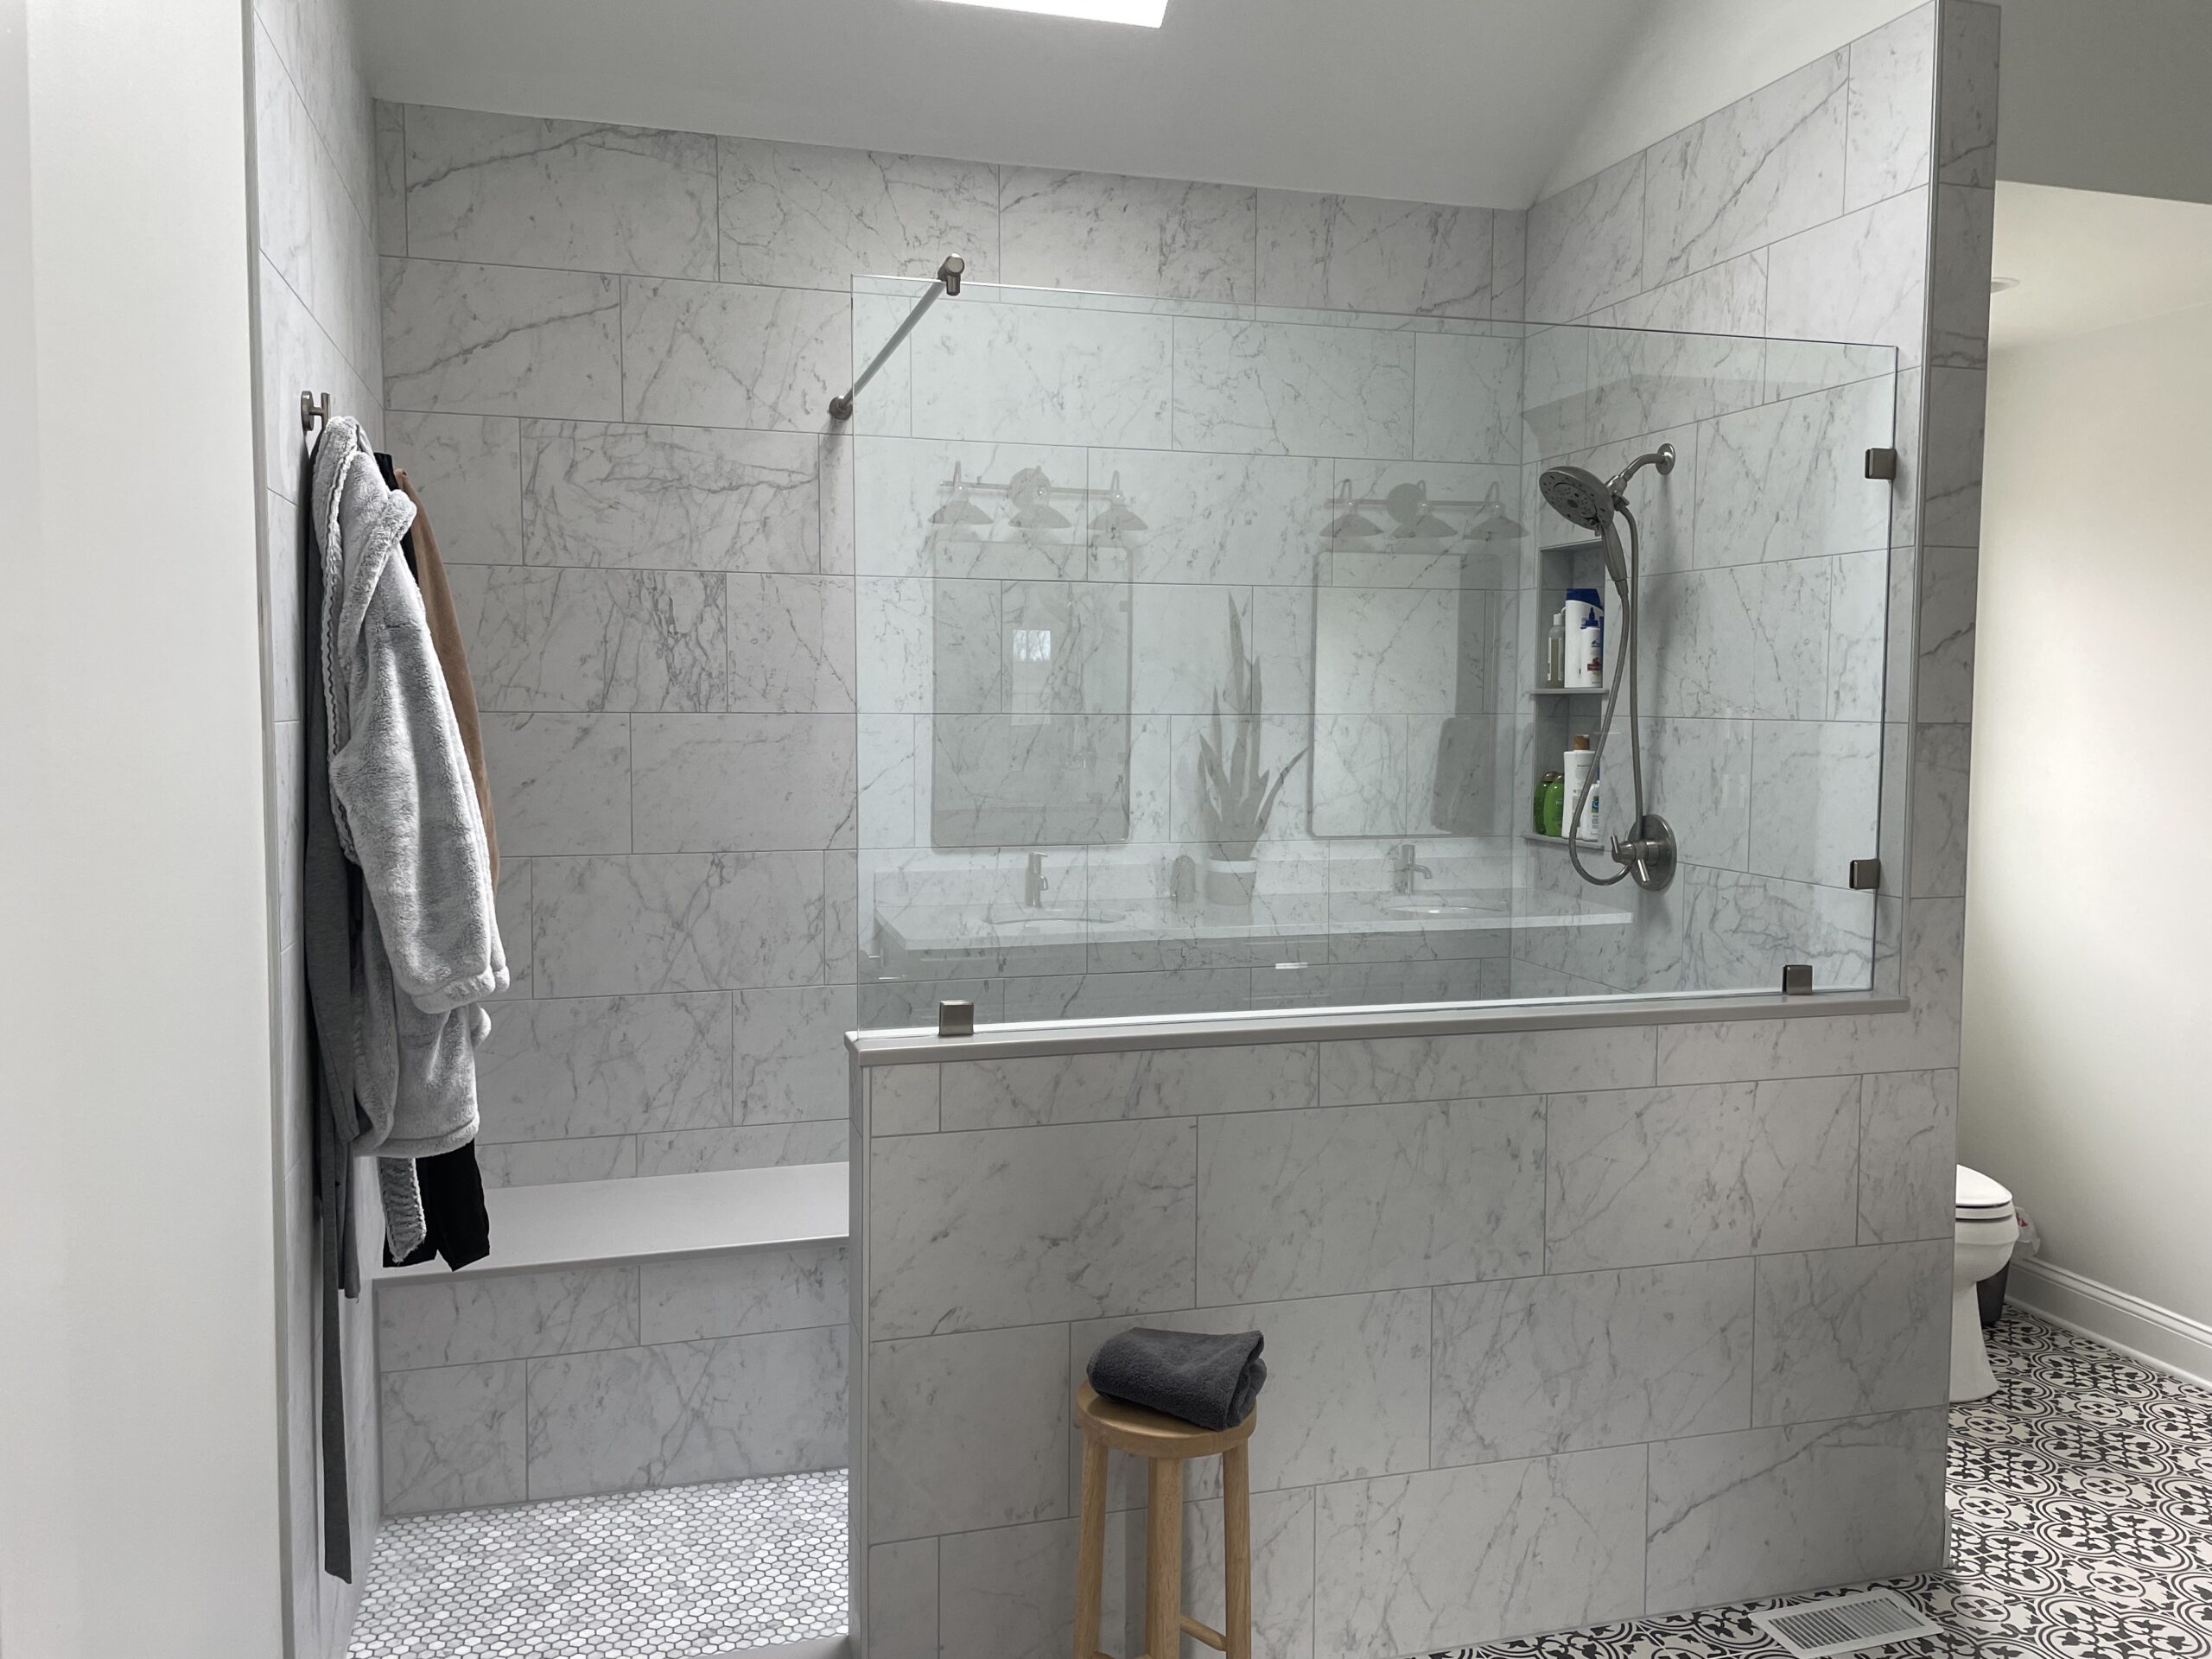 Classic bathroom remodel, folmar shower, large light colored wall tiles, shelves, traditional black and white floor tiles, toilet